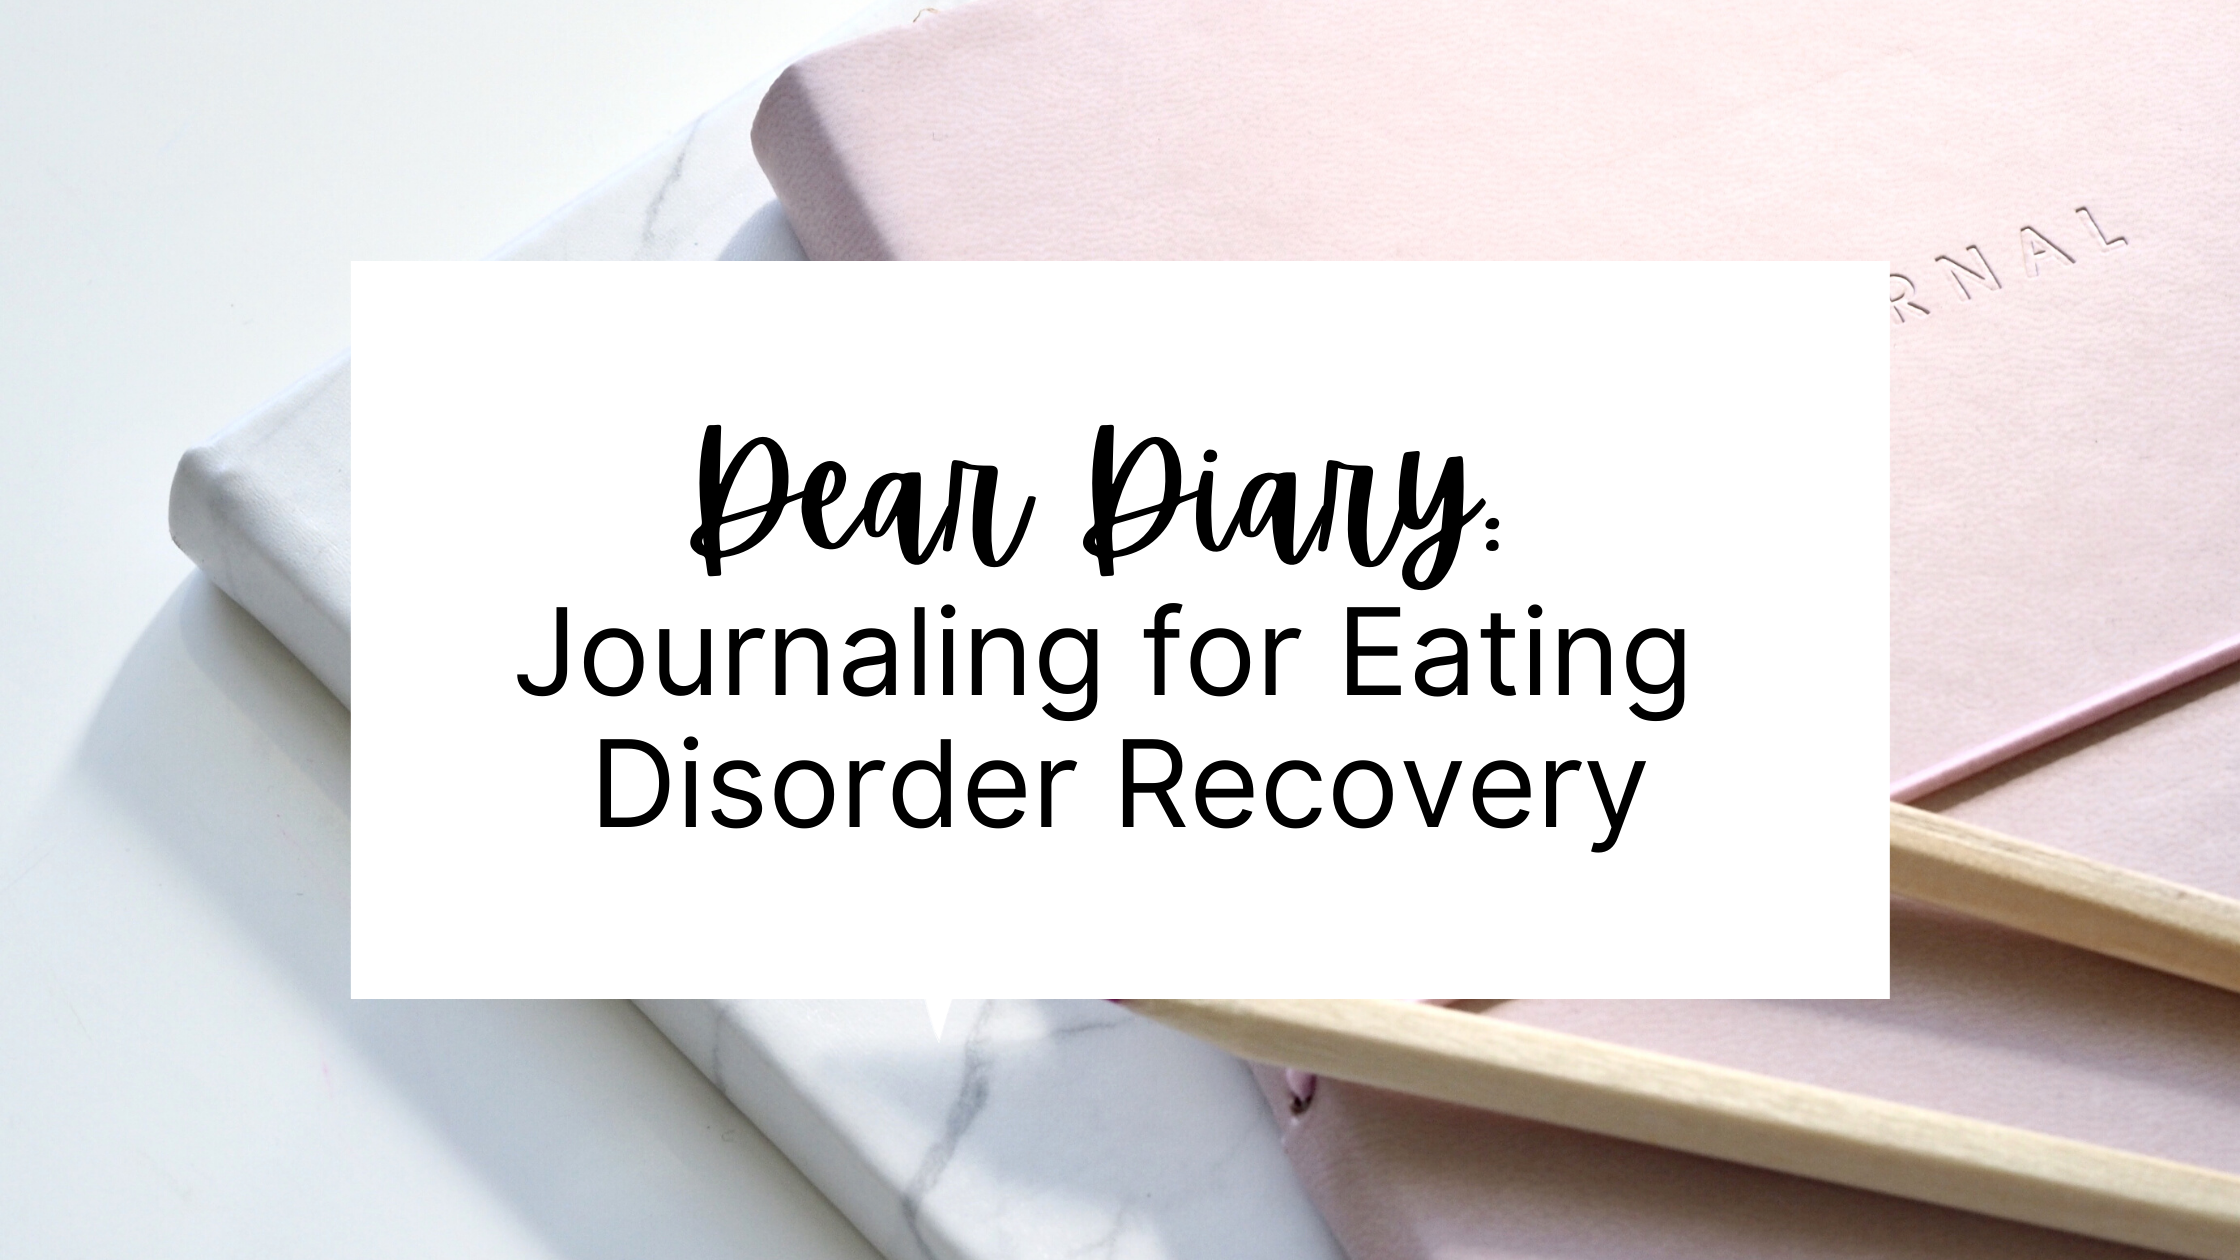 Journaling for Eating Disorder Recovery